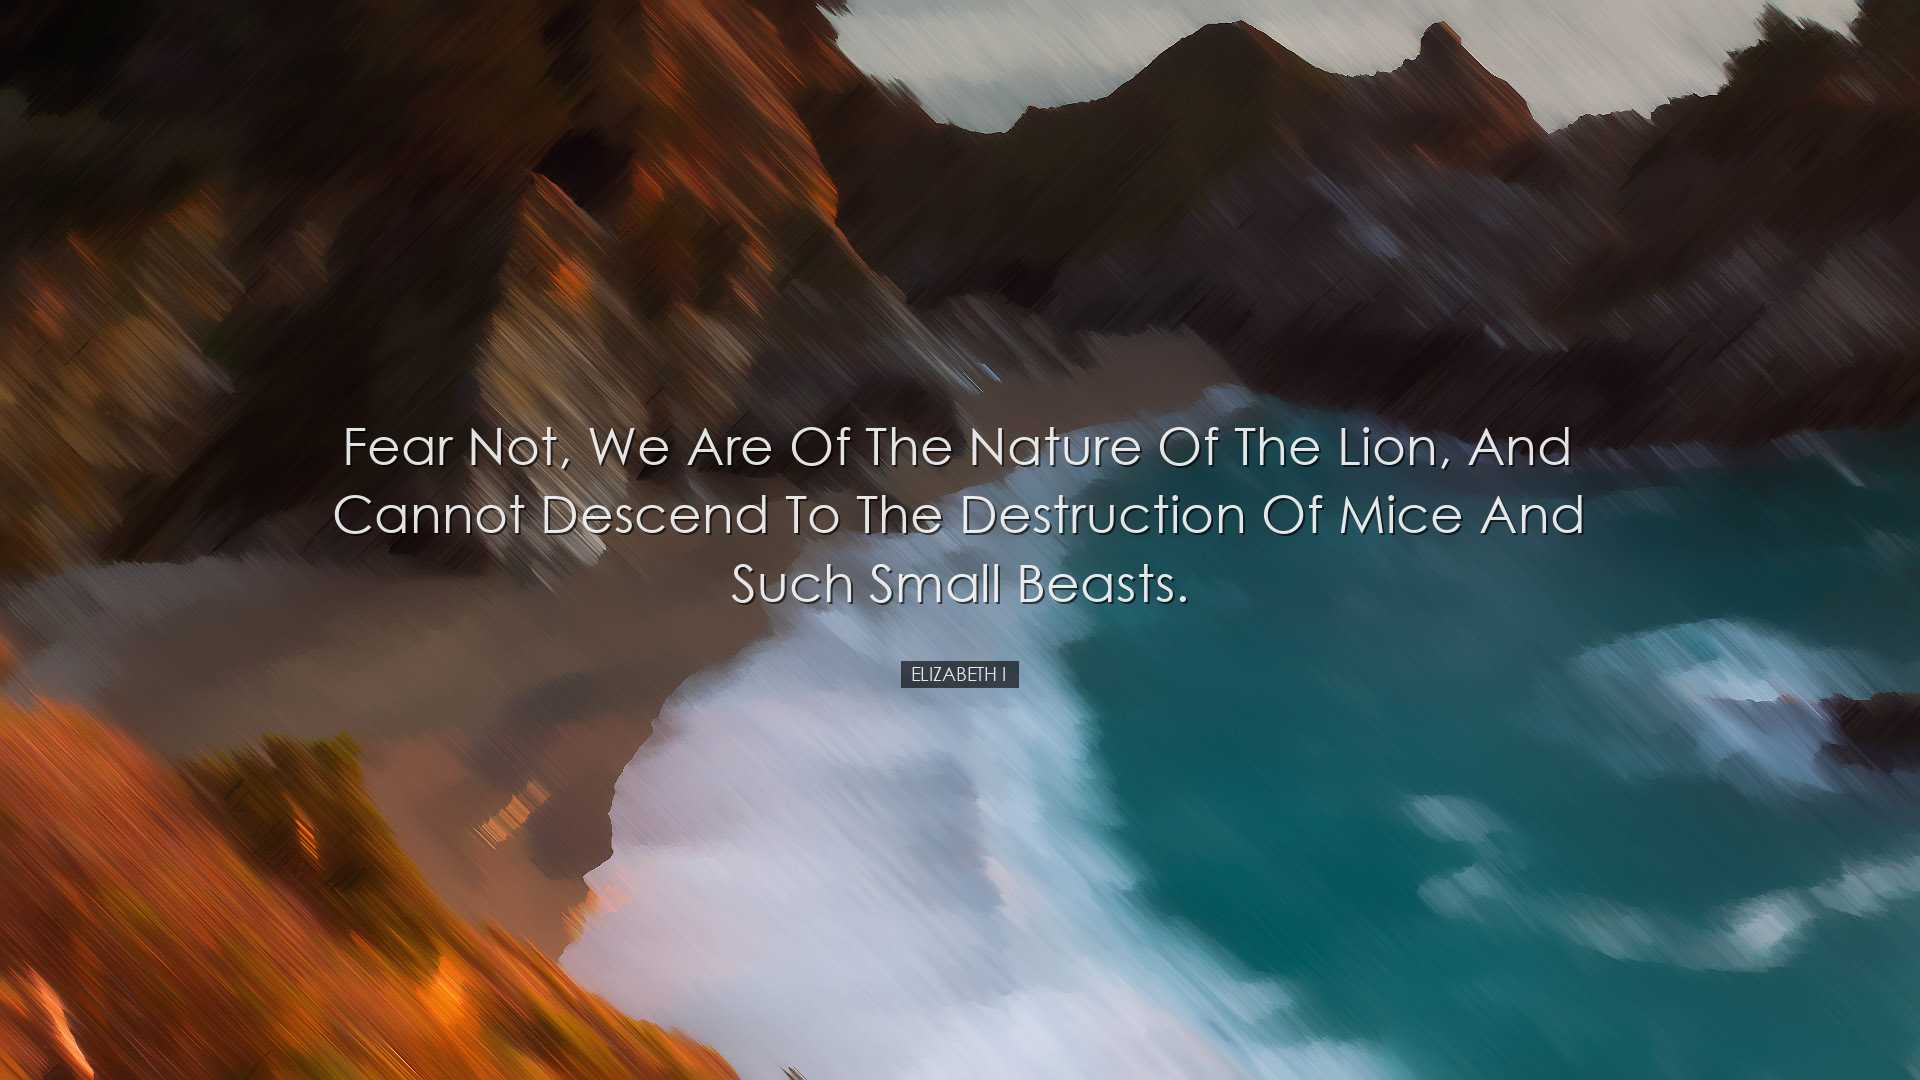 Fear not, we are of the nature of the lion, and cannot descend to